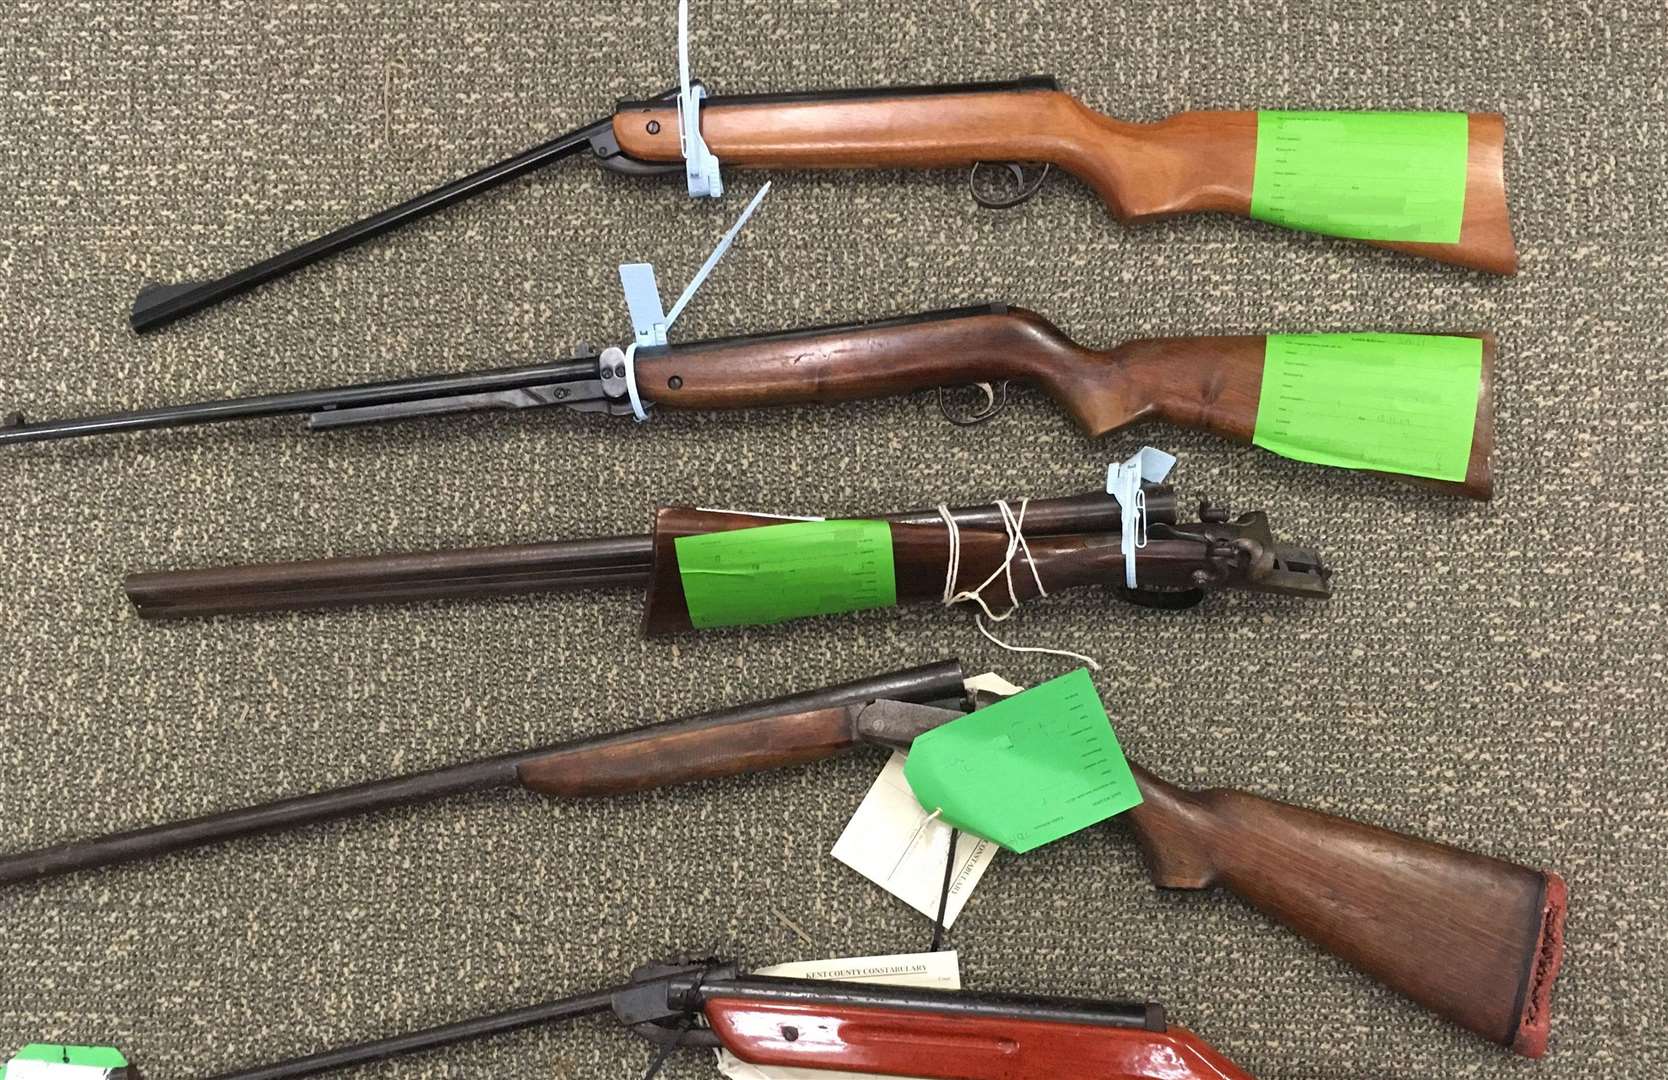 Some guns handed in to police during a surrender in 2017